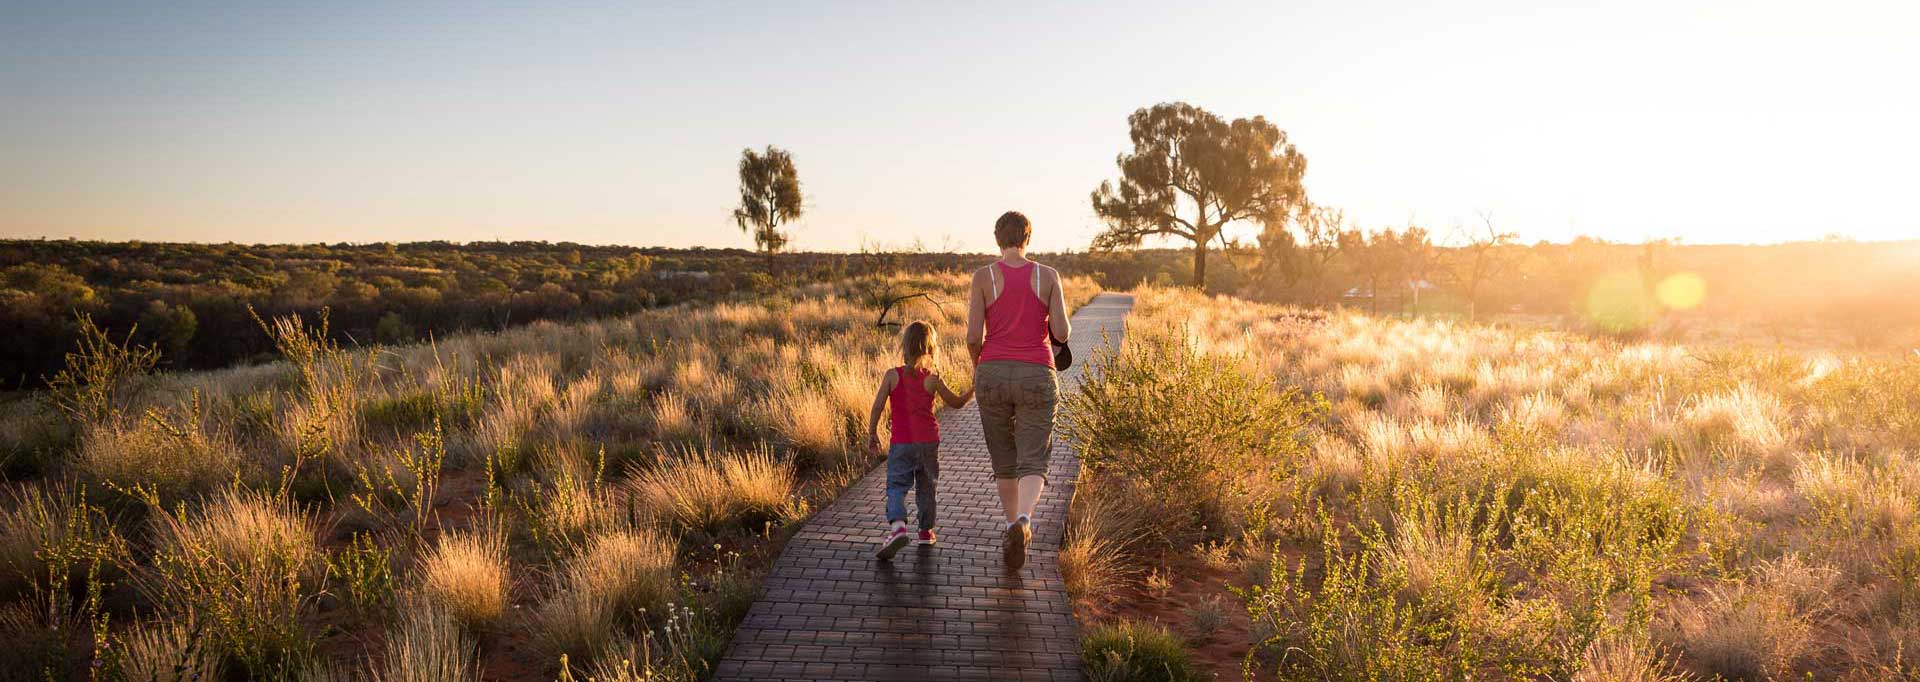 woman and girl wearing pink tank tops walking down paved pathway in large open field at sunset